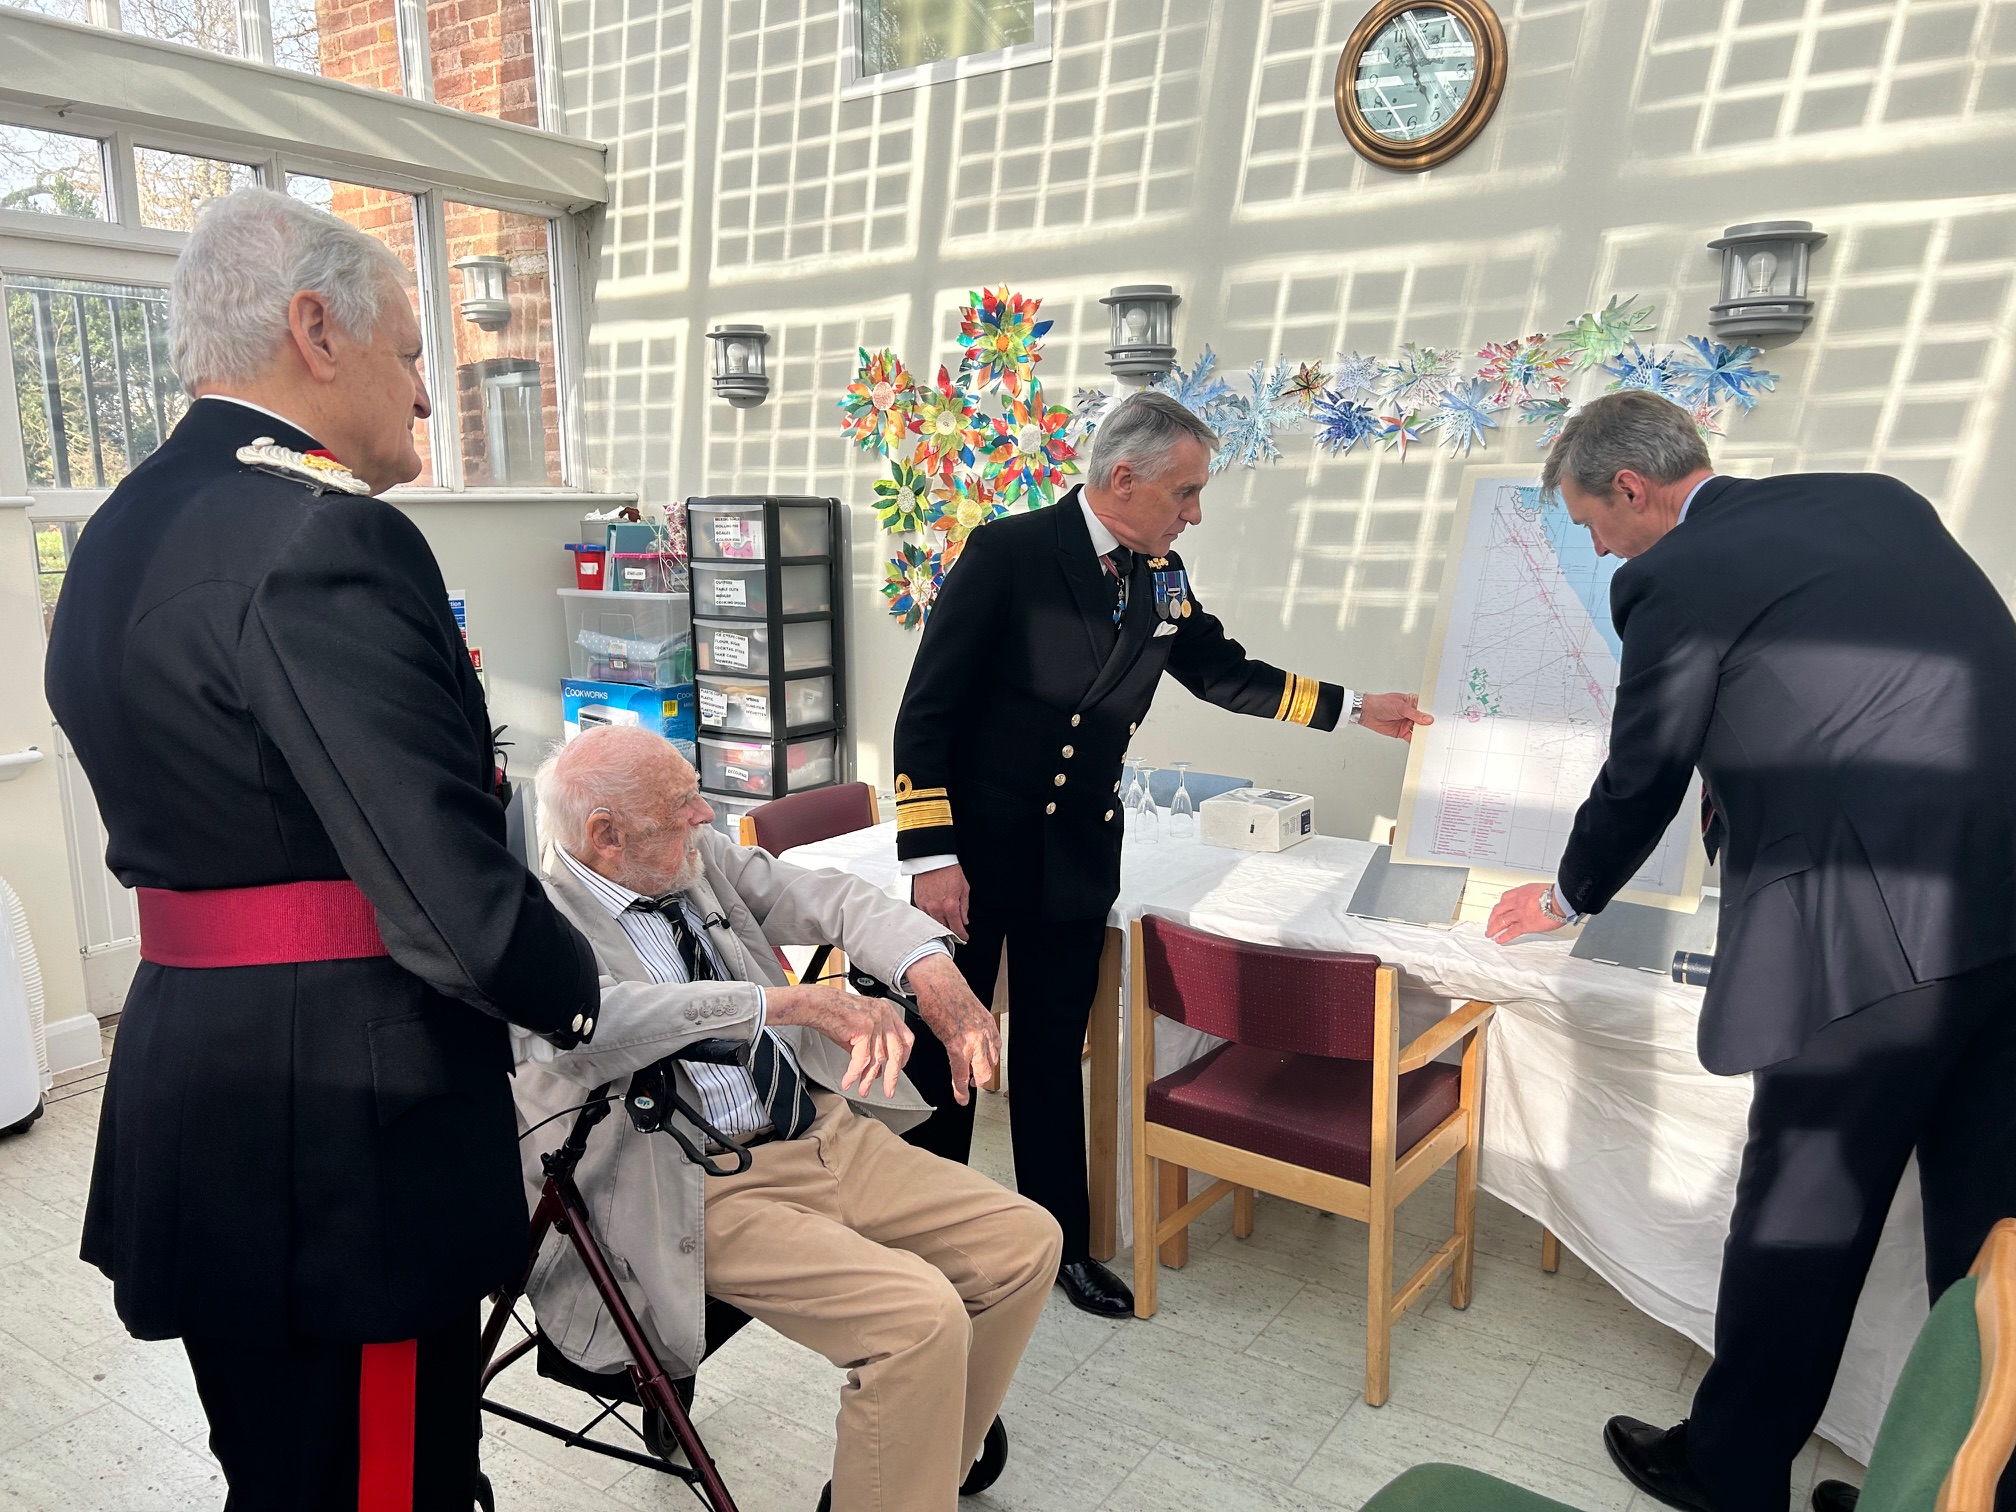 D-Day veteran Lieutenant Richard Willis RN is presented with a D-Day chart of the Utah beach landings to mark his 100th birthday (Lord-Lieutenant of Somerset/PA)